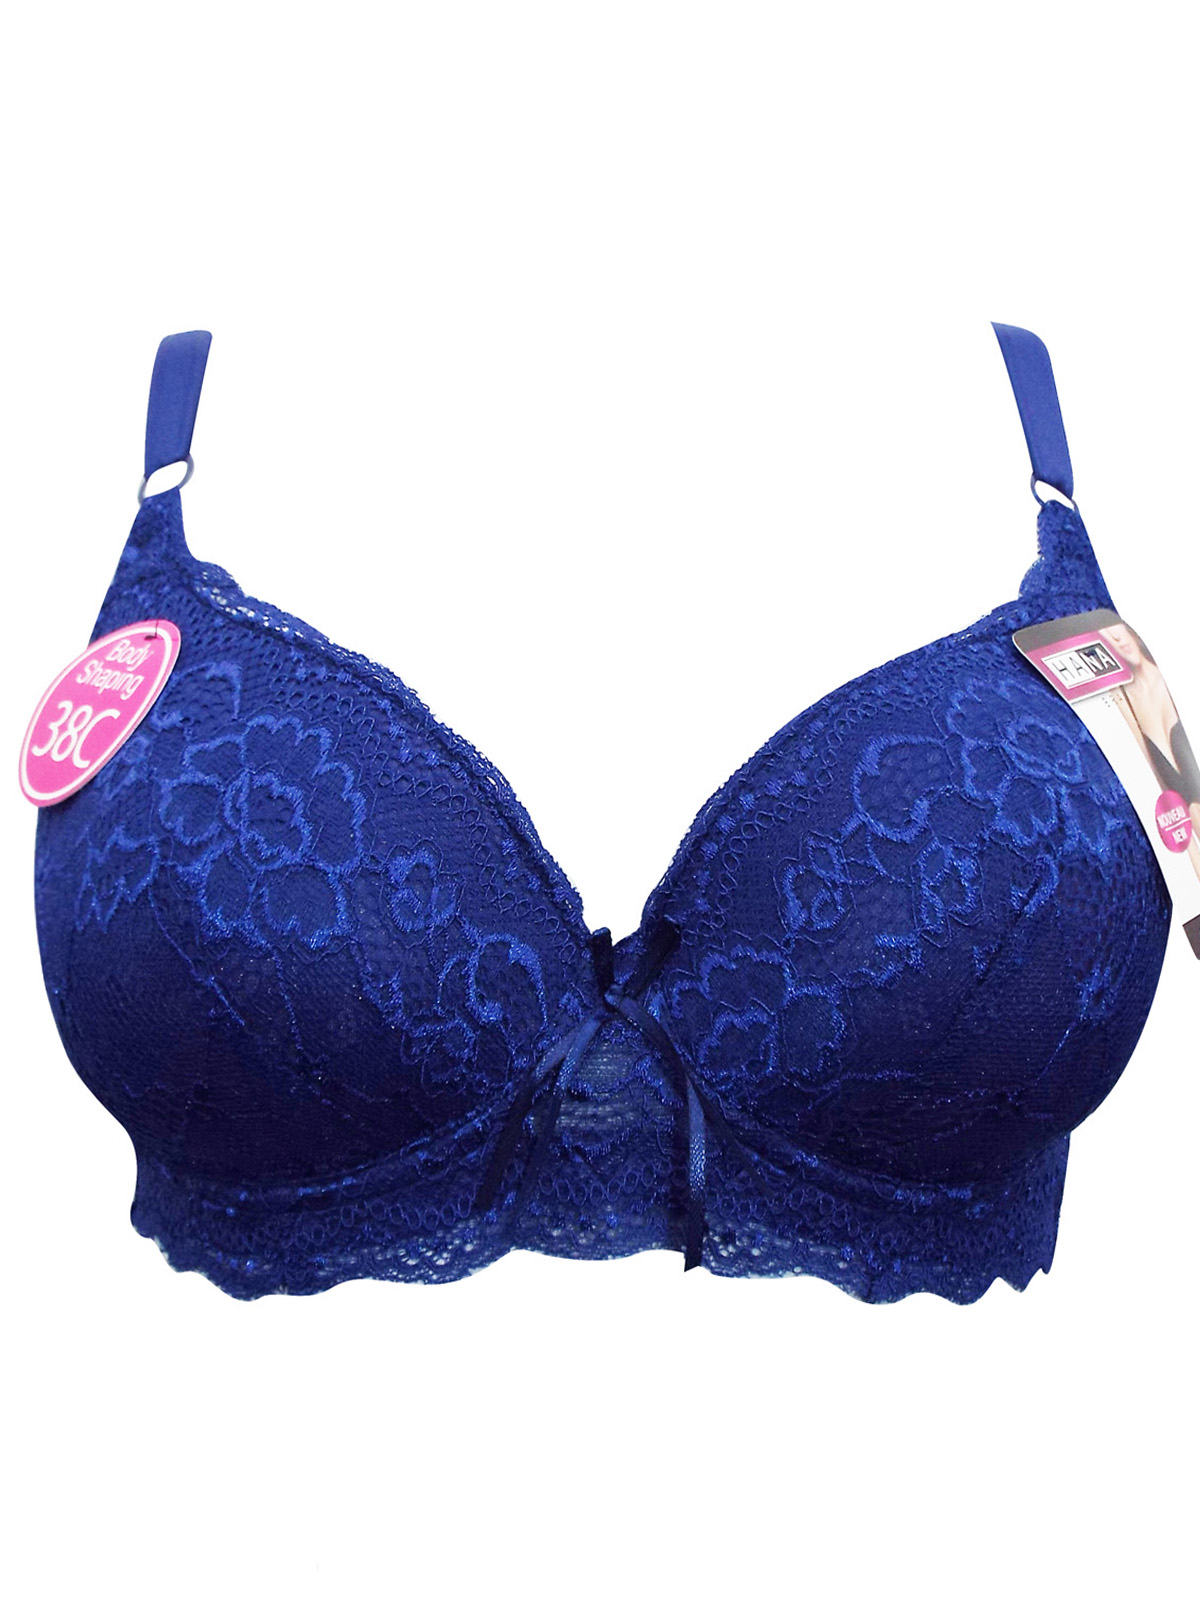 Hana - - Hana BLUE Floral Lace Padded & Wired Full Cup Bra - Size 38 to 48 ( C cup)